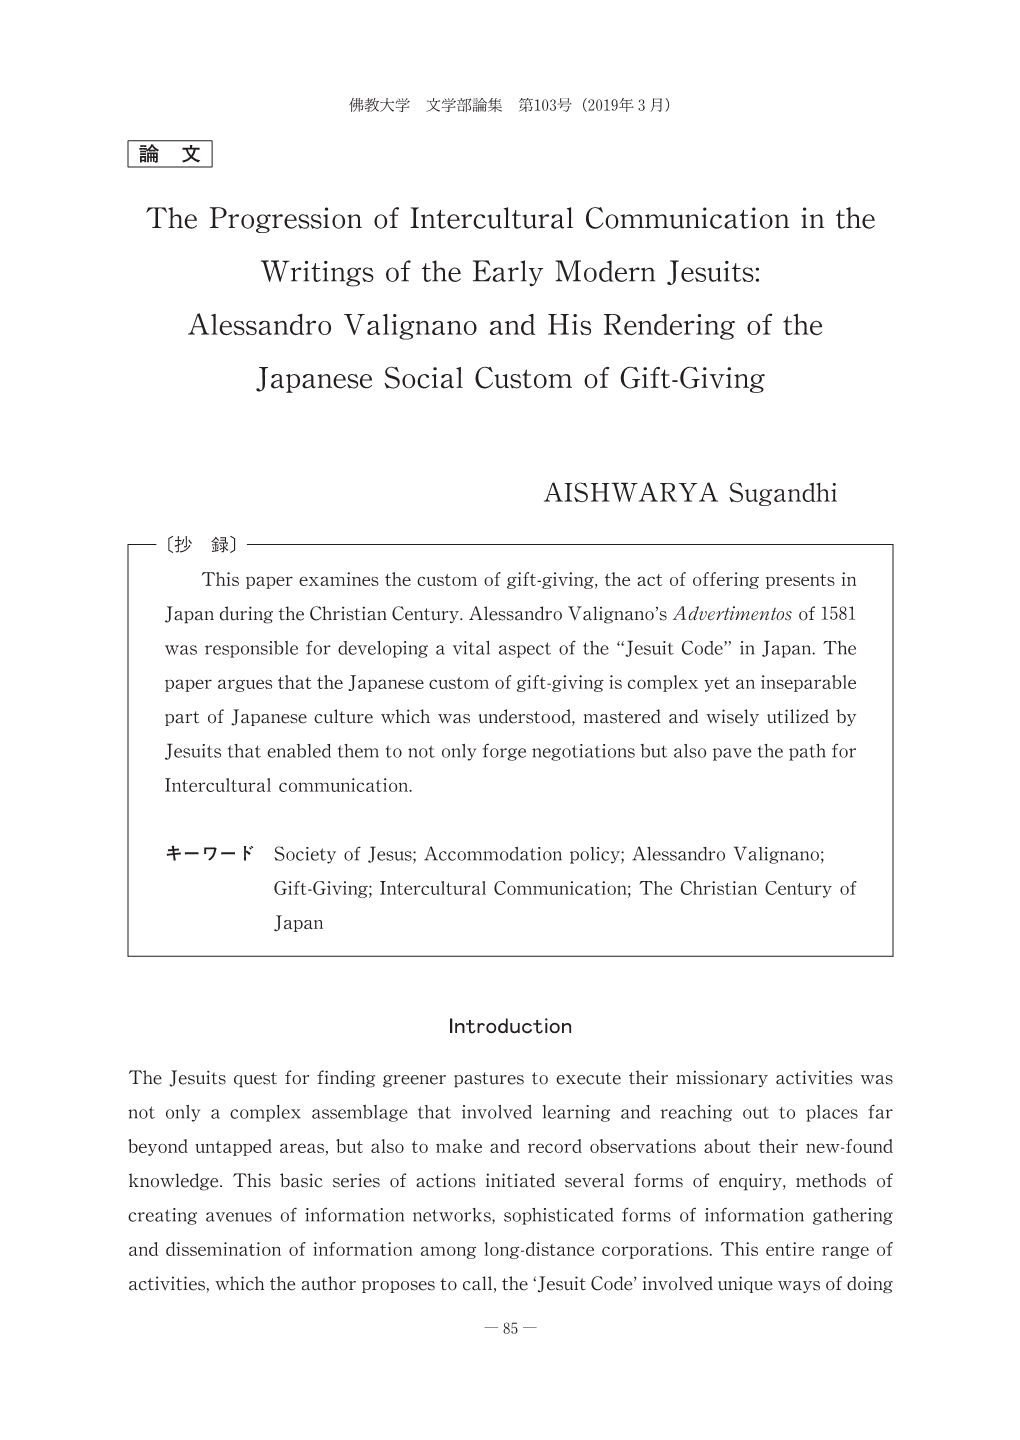 Alessandro Valignano and His Rendering of the Japanese Social Custom of Gift-Giving